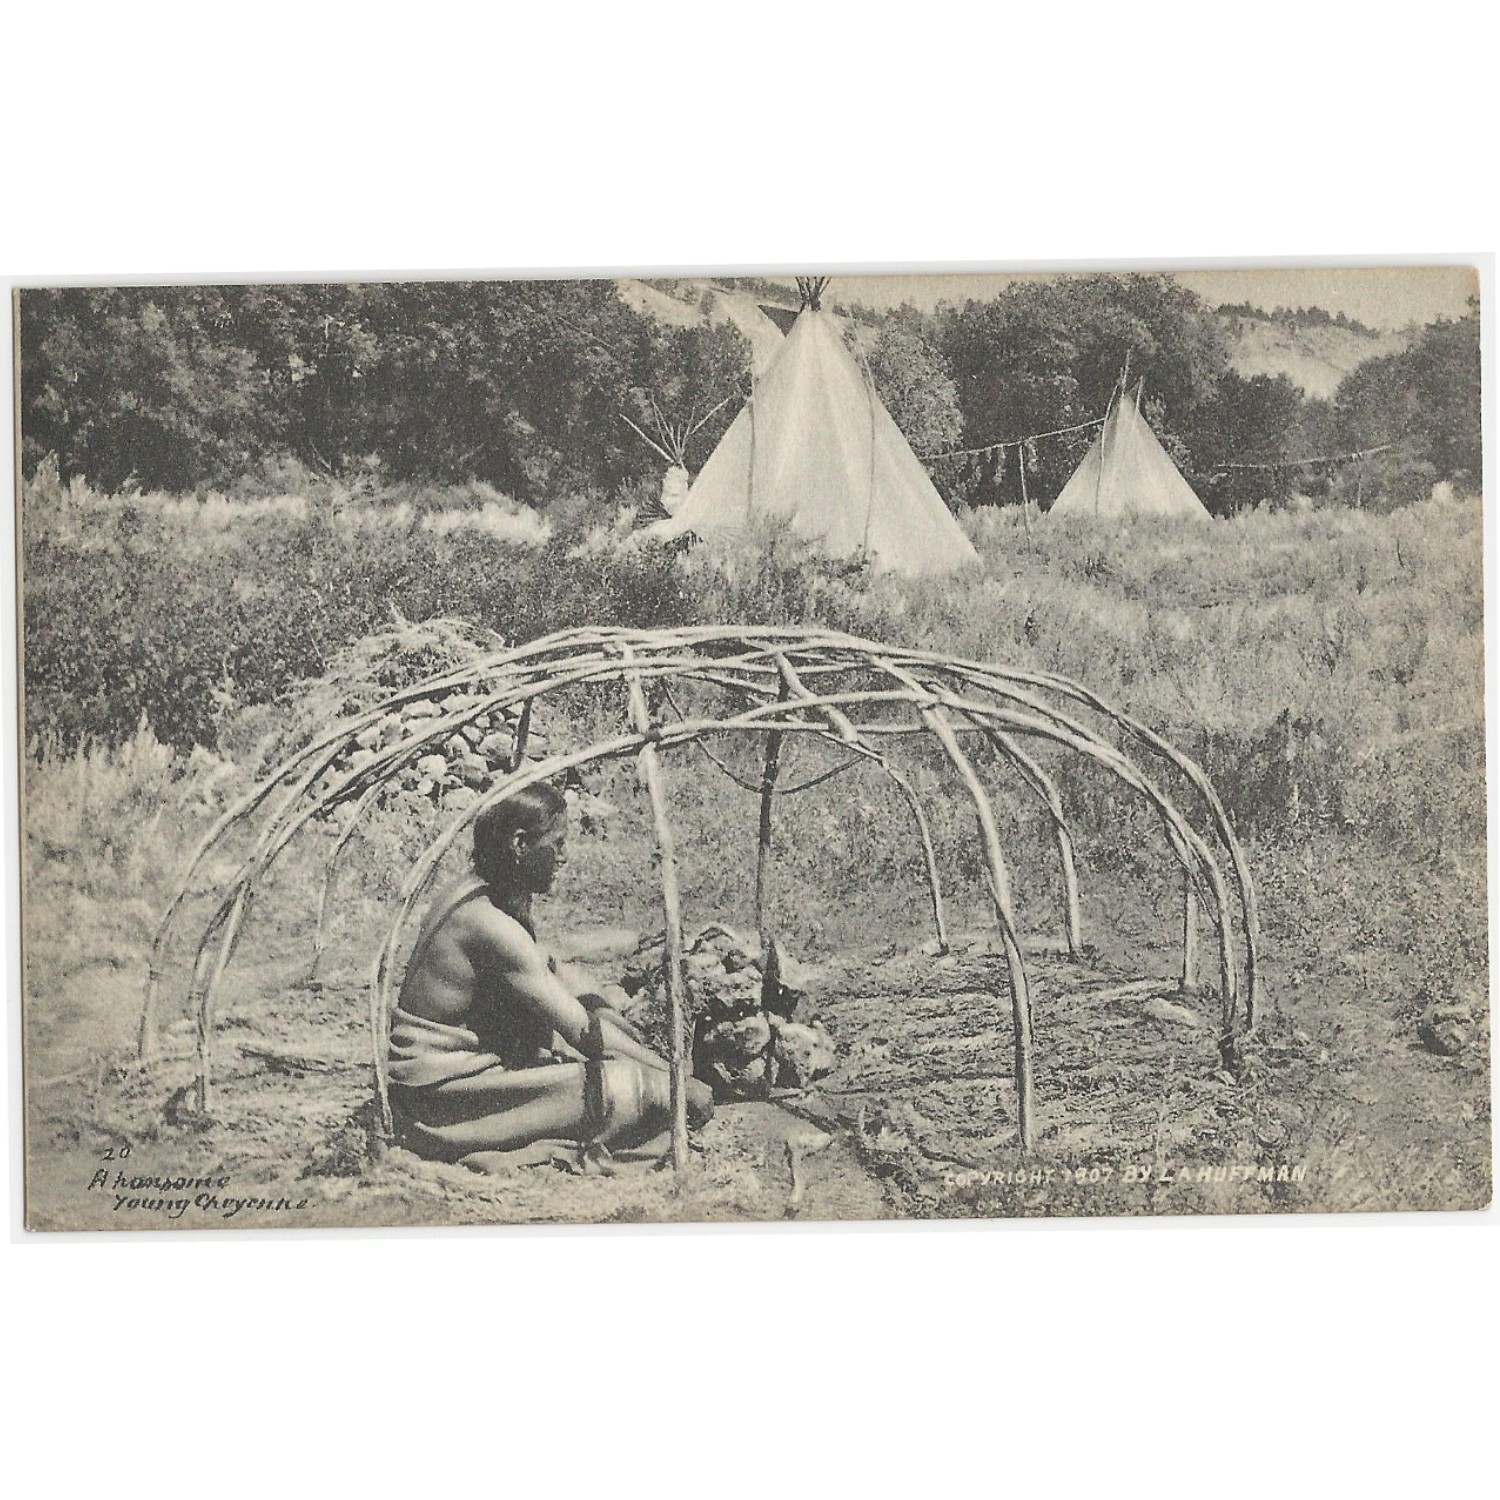 Postcard of Pretty Bird Cheyenne during a sweat lodge ceremony by L.A. Huffman